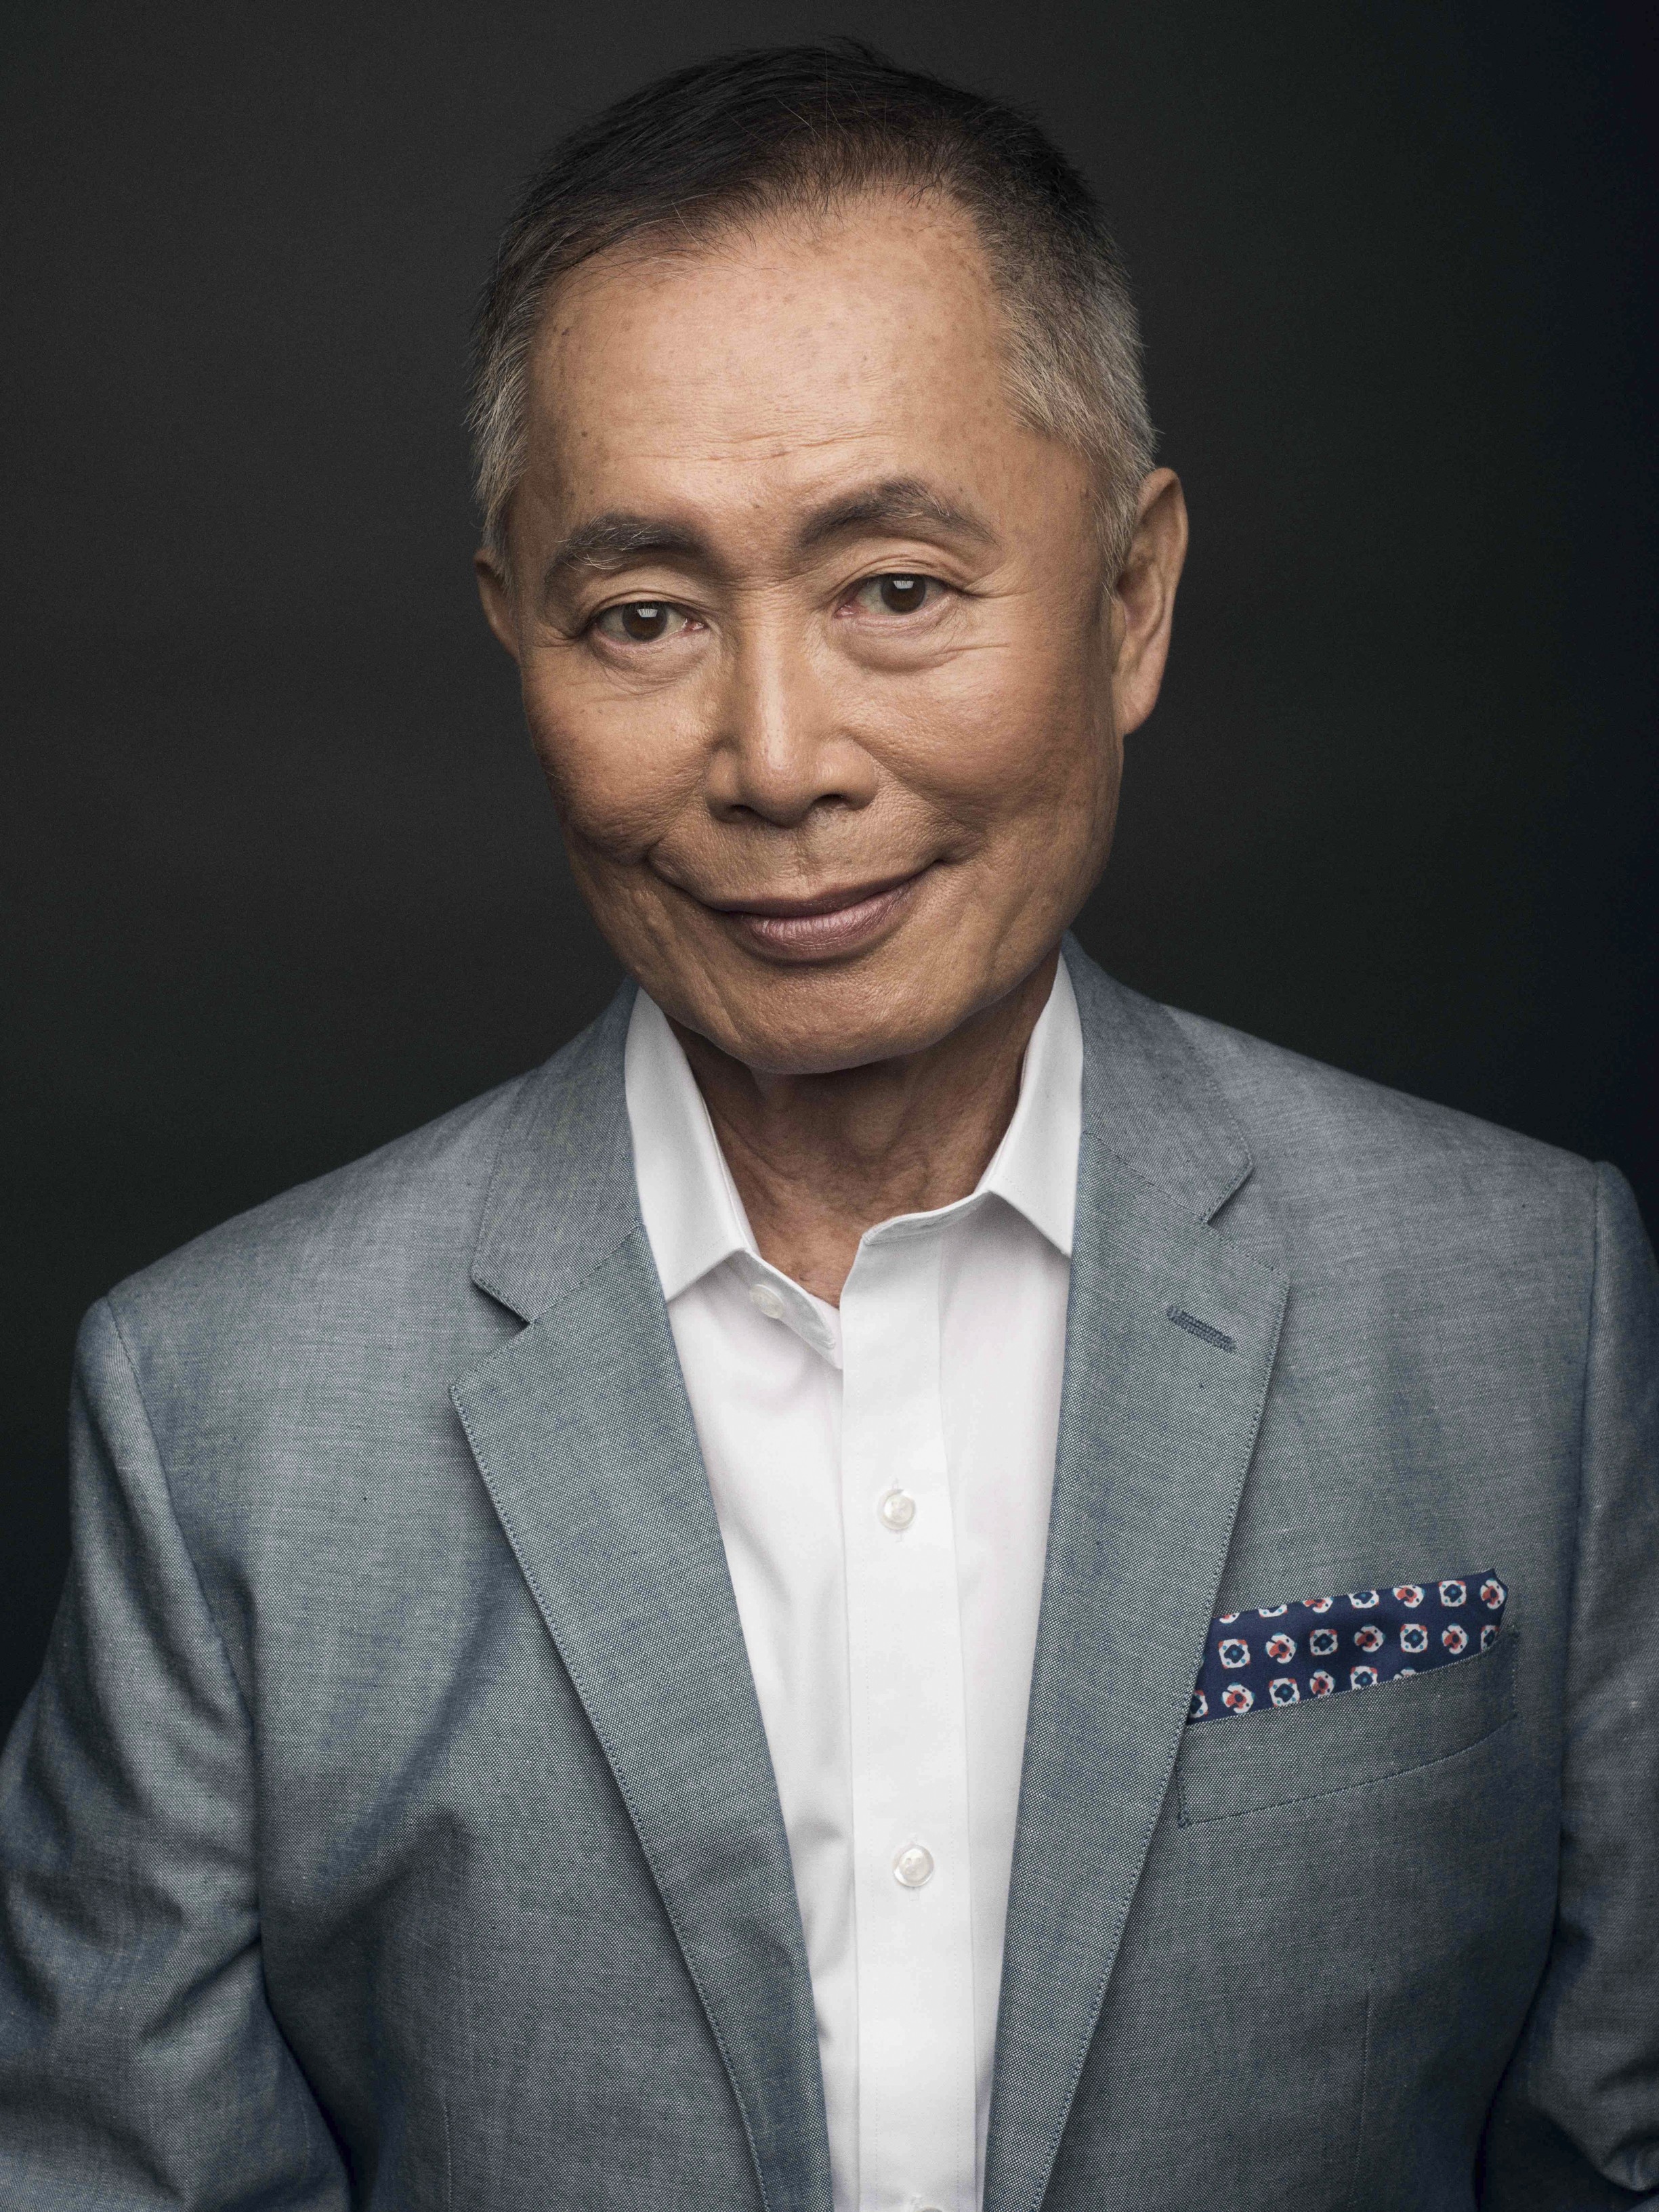 Takei, 81, who played Sulu in the original ‘Star Trek’ series, says the policy of dividing immigrant families is even worse than the Japanese internment camps he experienced as a child